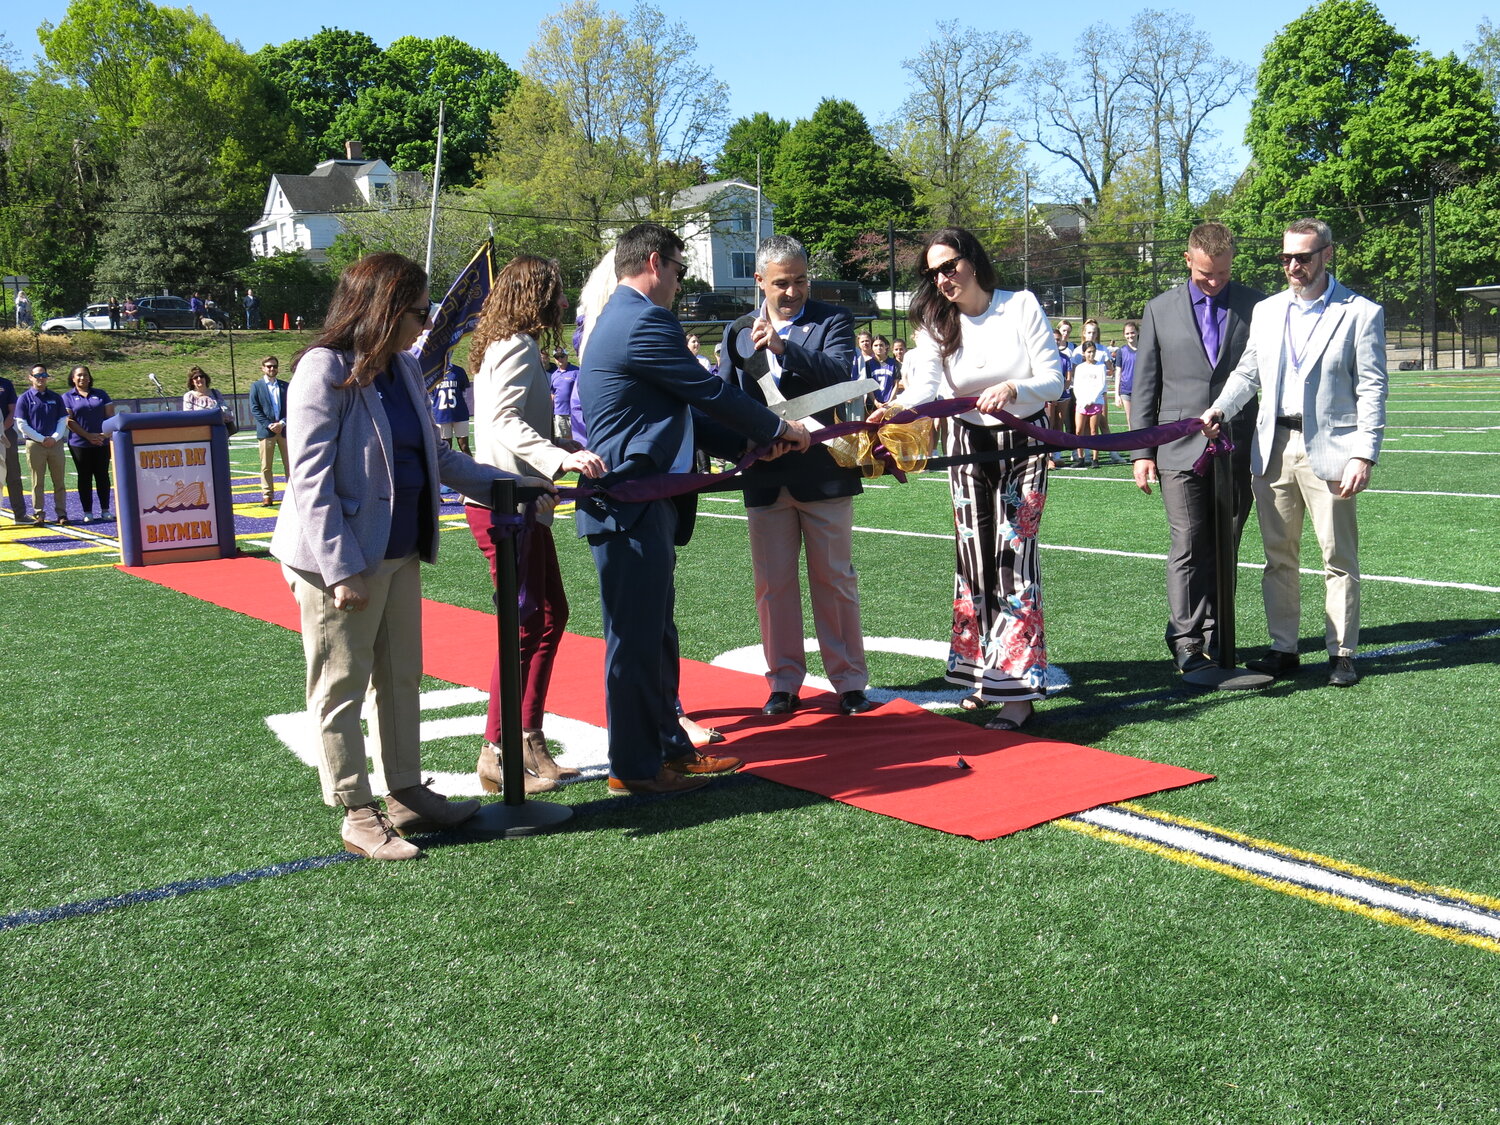 District Superintendent Francesco Ianni, above left, wielding the oversized scissors, did the honors.